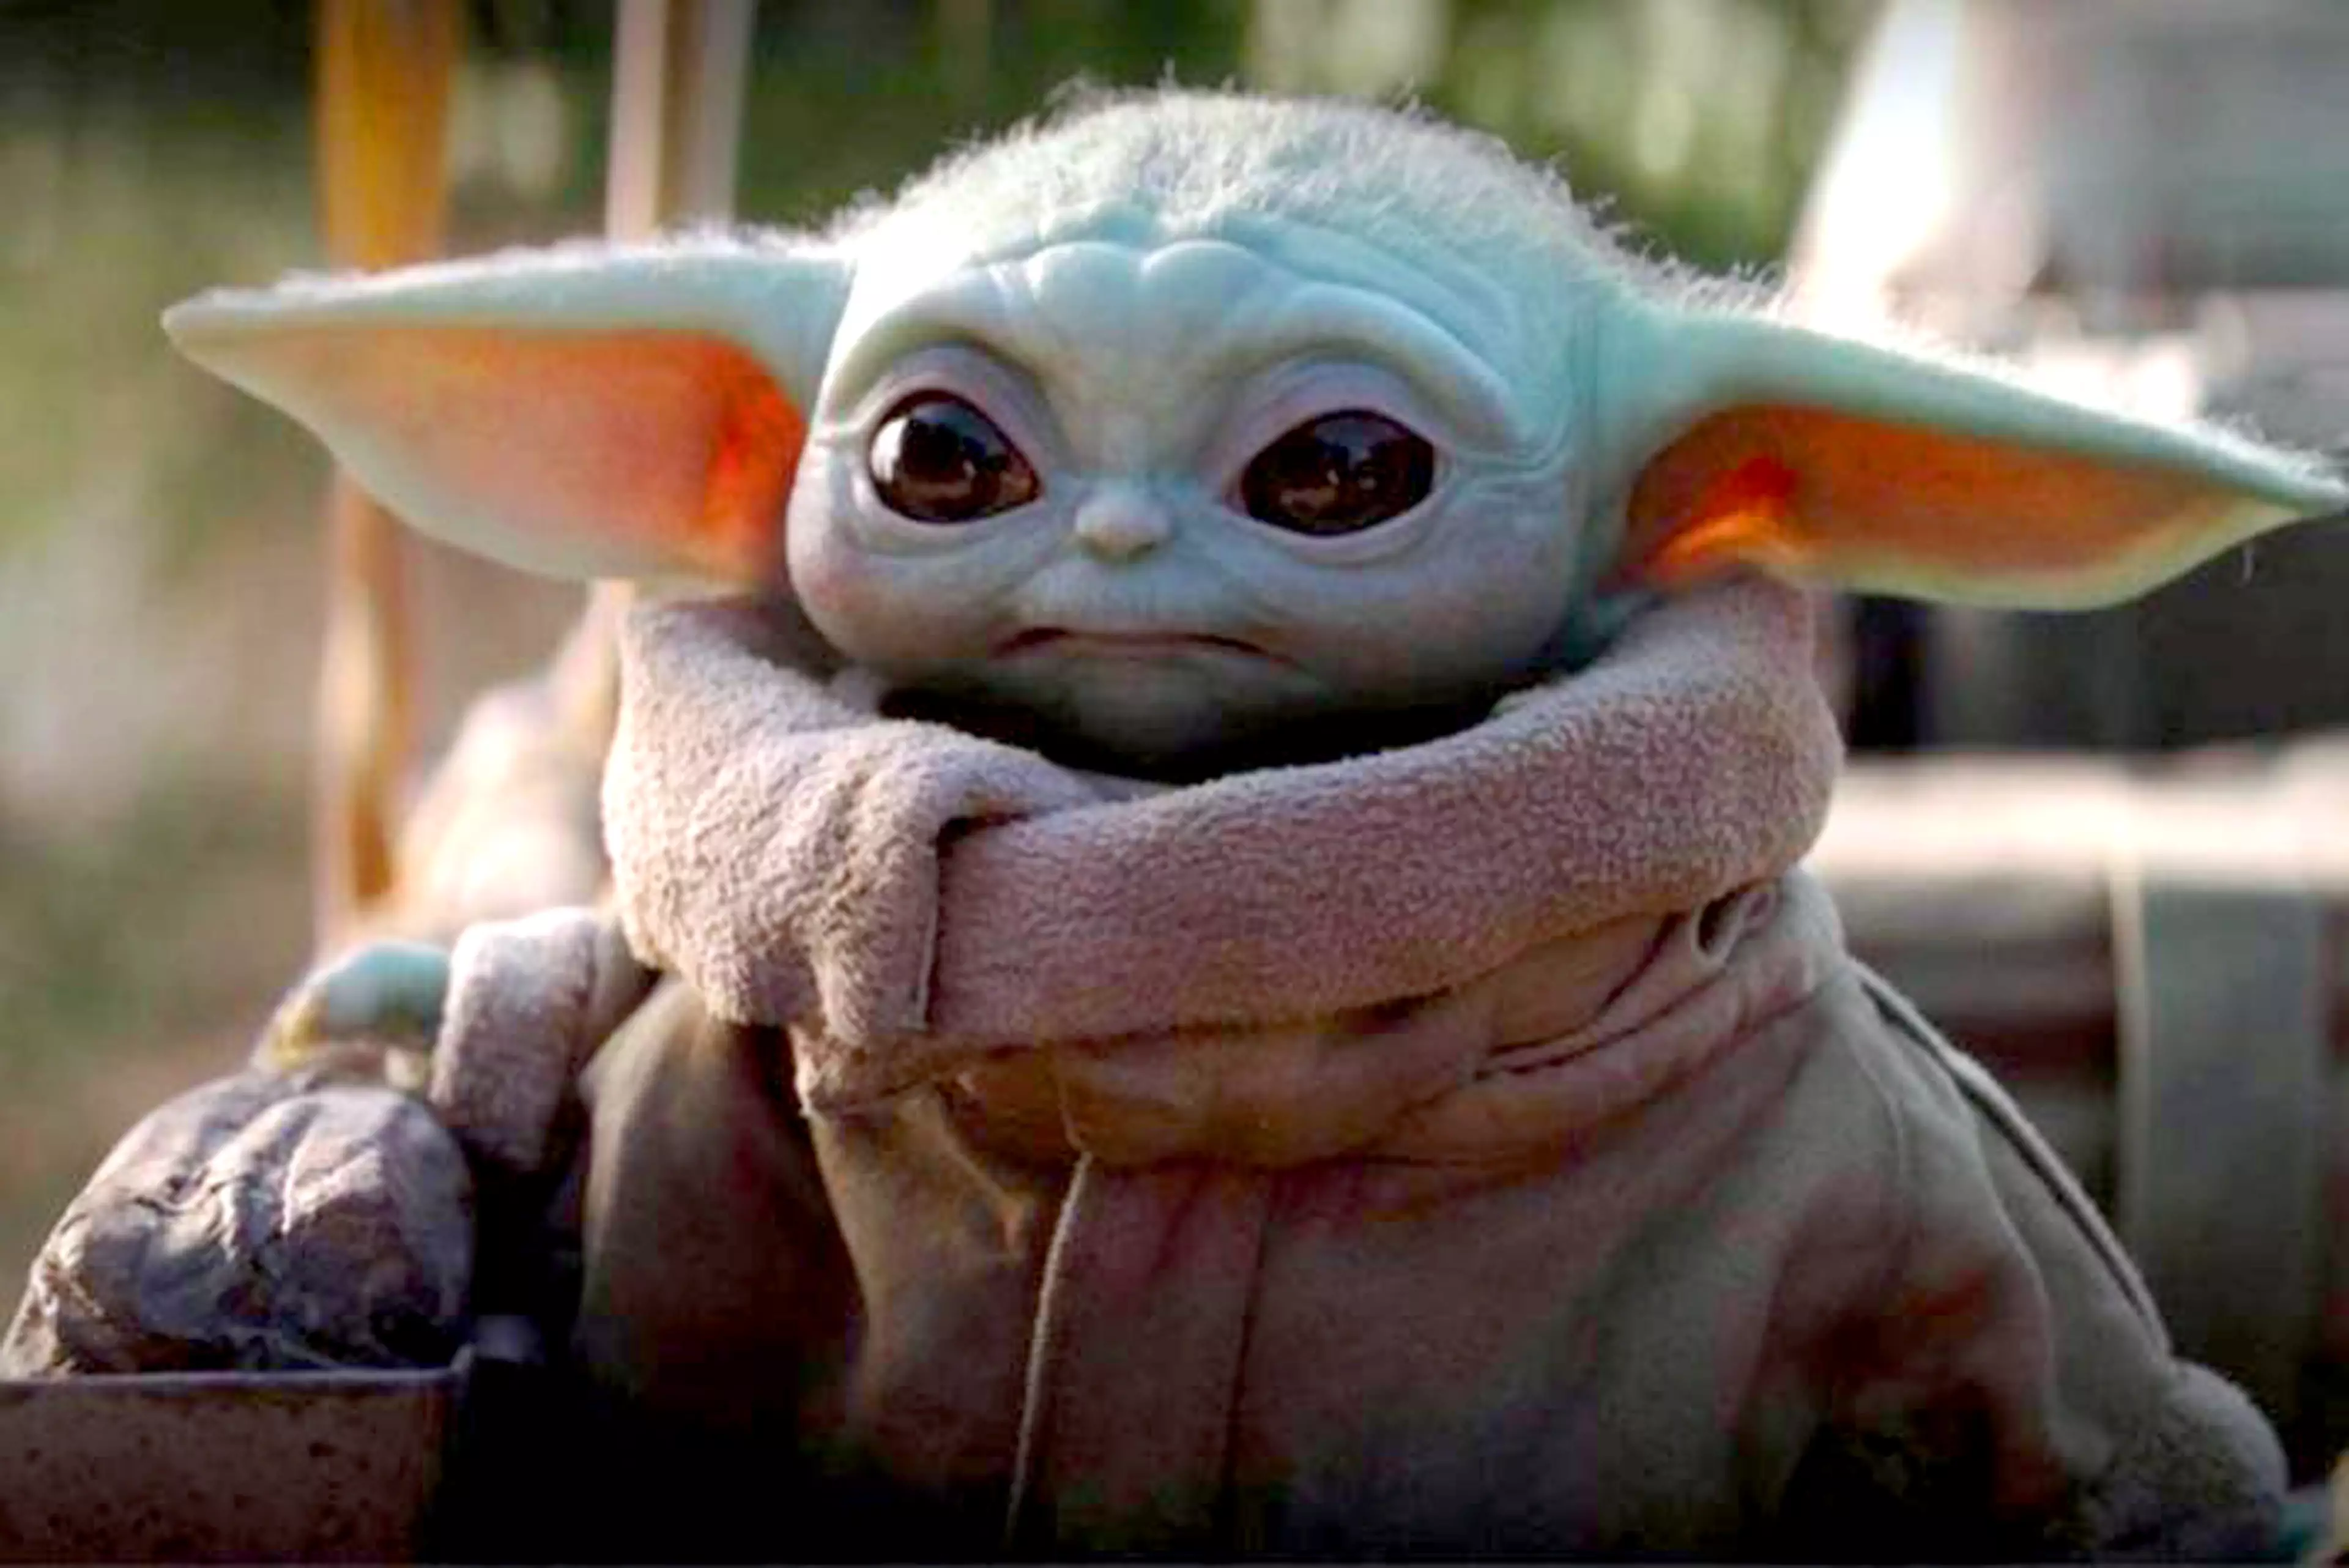 Many online are calling him the feline version of Baby Yoda (